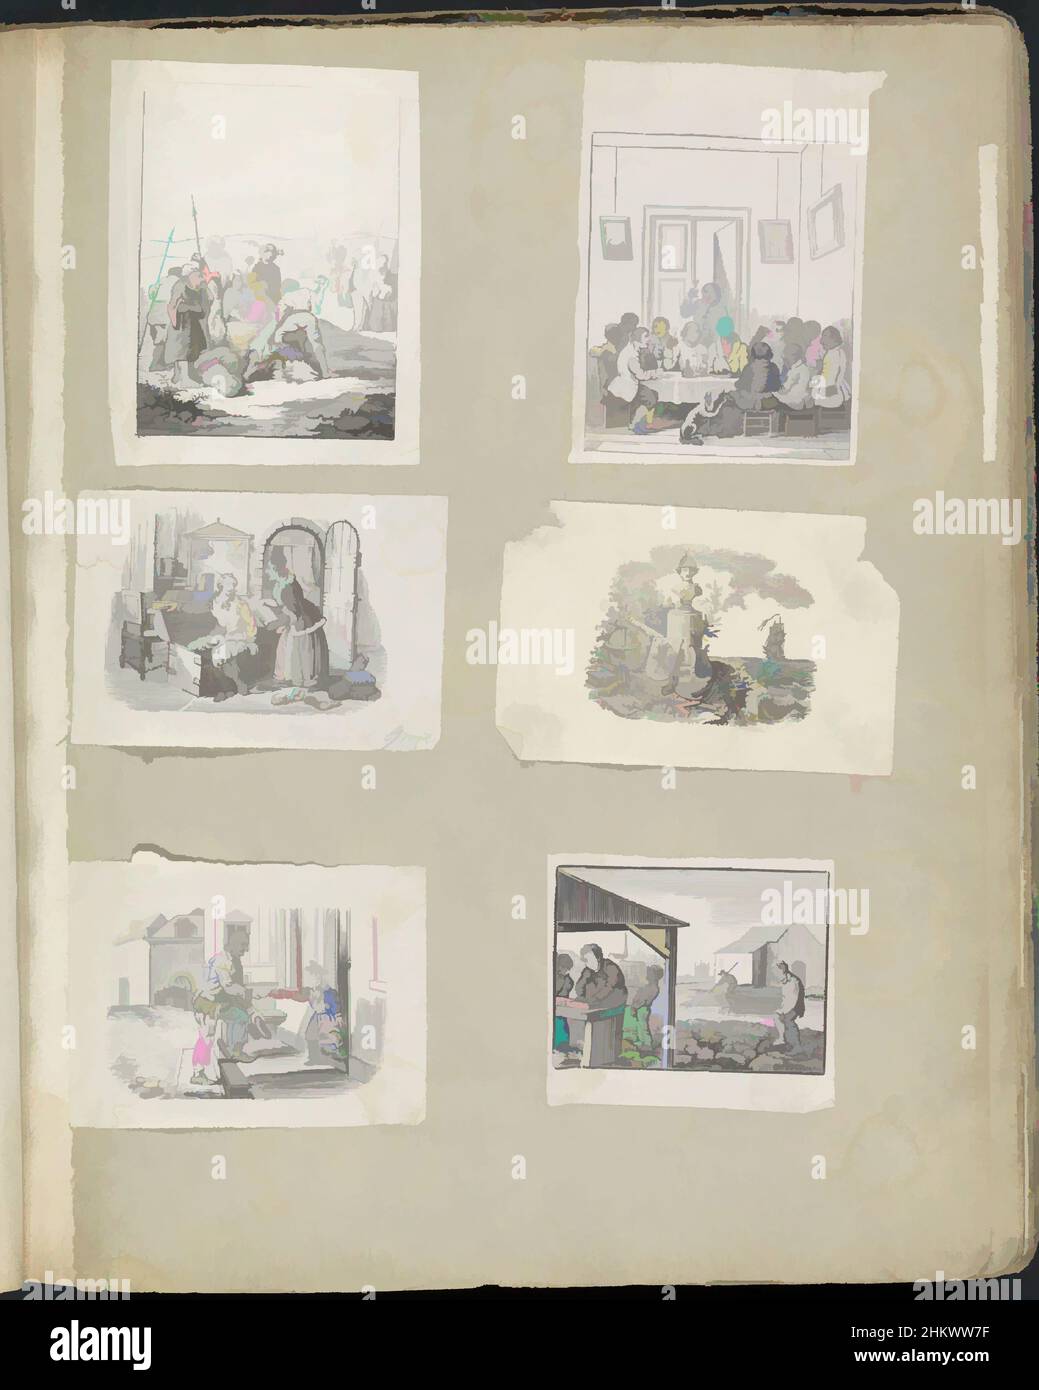 Art inspired by Album sheet with various representations, Album sheet with 6 cut-out representations from mainly folk prints, of, among others, a group of men around a dead camel, Hugo de Groot climbing into the book chest and a boy giving food to a beggar., print maker: Alexander, Classic works modernized by Artotop with a splash of modernity. Shapes, color and value, eye-catching visual impact on art. Emotions through freedom of artworks in a contemporary way. A timeless message pursuing a wildly creative new direction. Artists turning to the digital medium and creating the Artotop NFT Stock Photo